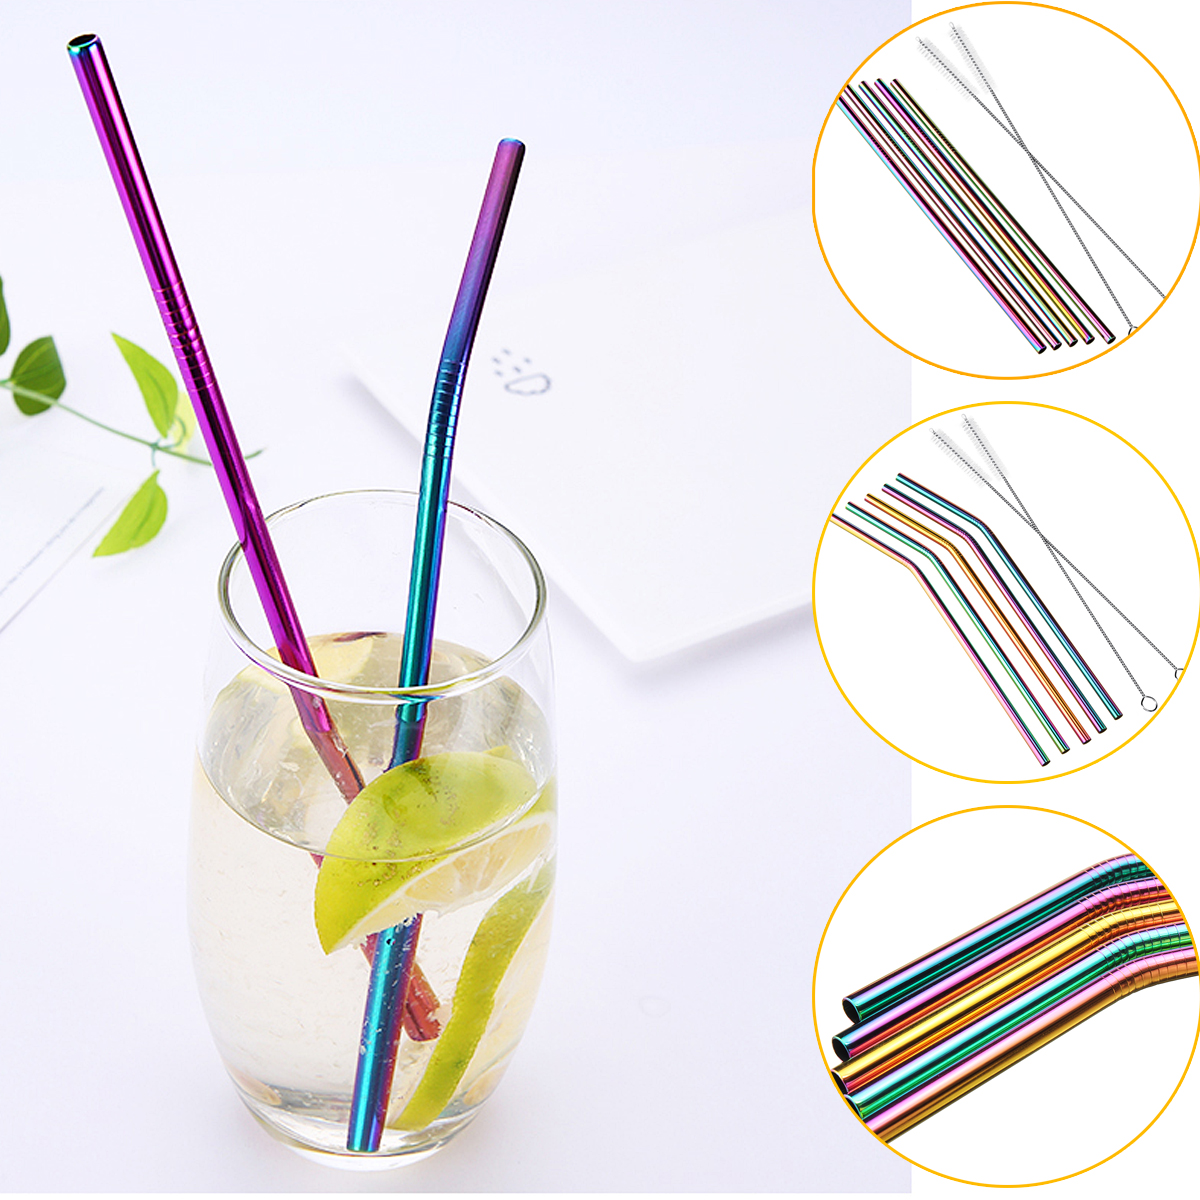 7PCS Premium Stainless Steel Metal Drinking Straw Reusable Straws Set With Cleaner Brushes 13